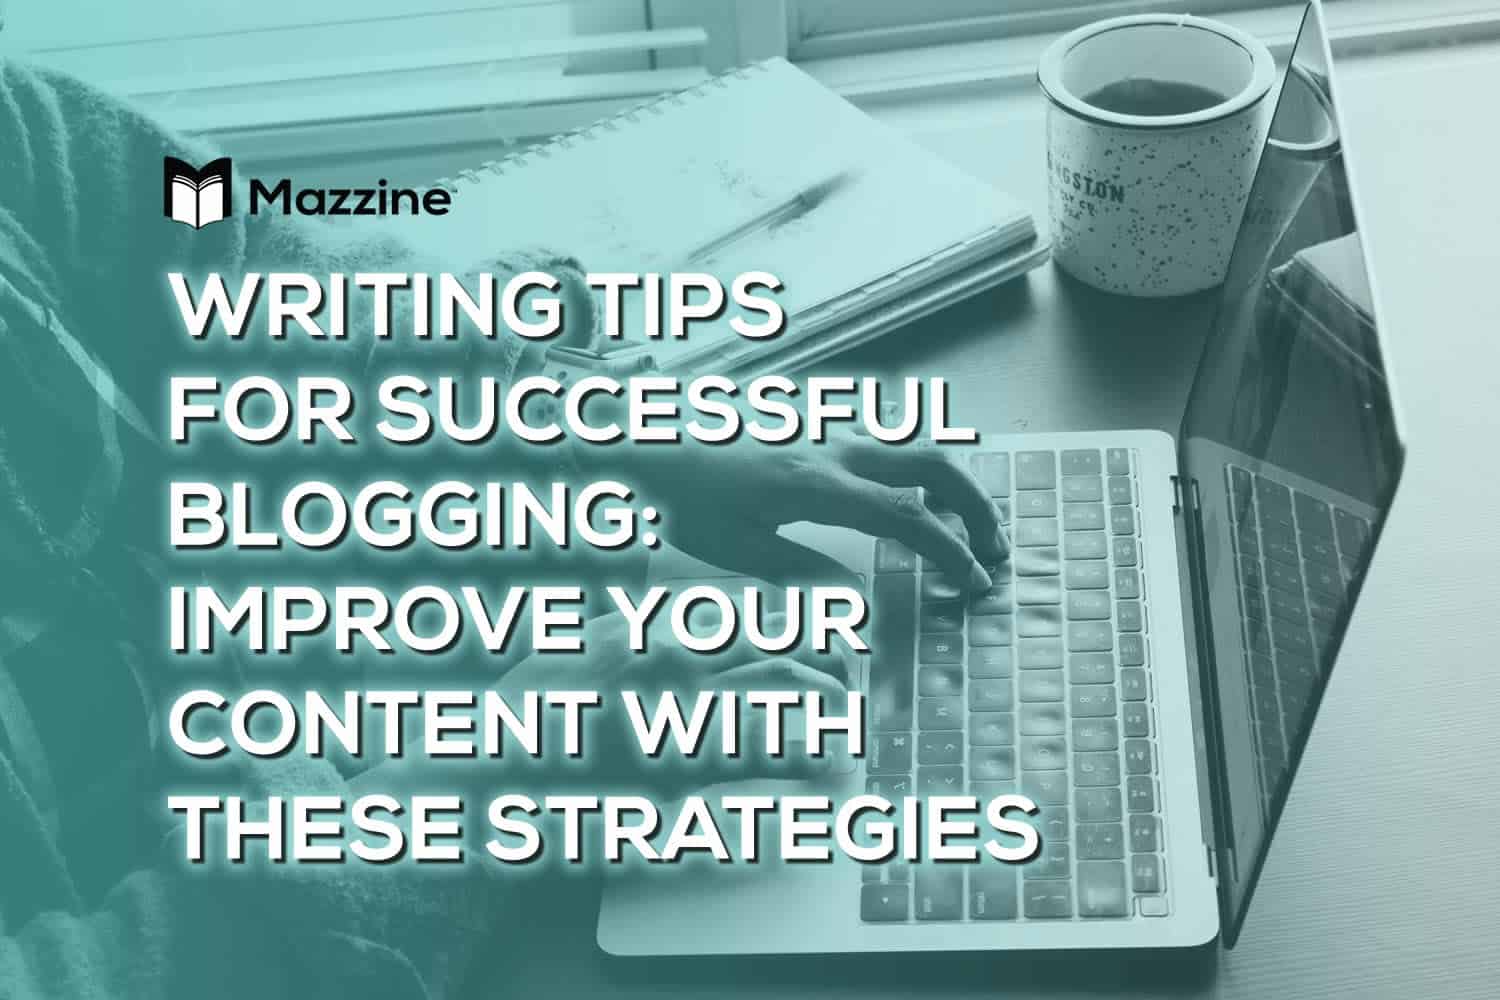 Writing Tips for Successful Blogging: Improve Your Content with These Strategies